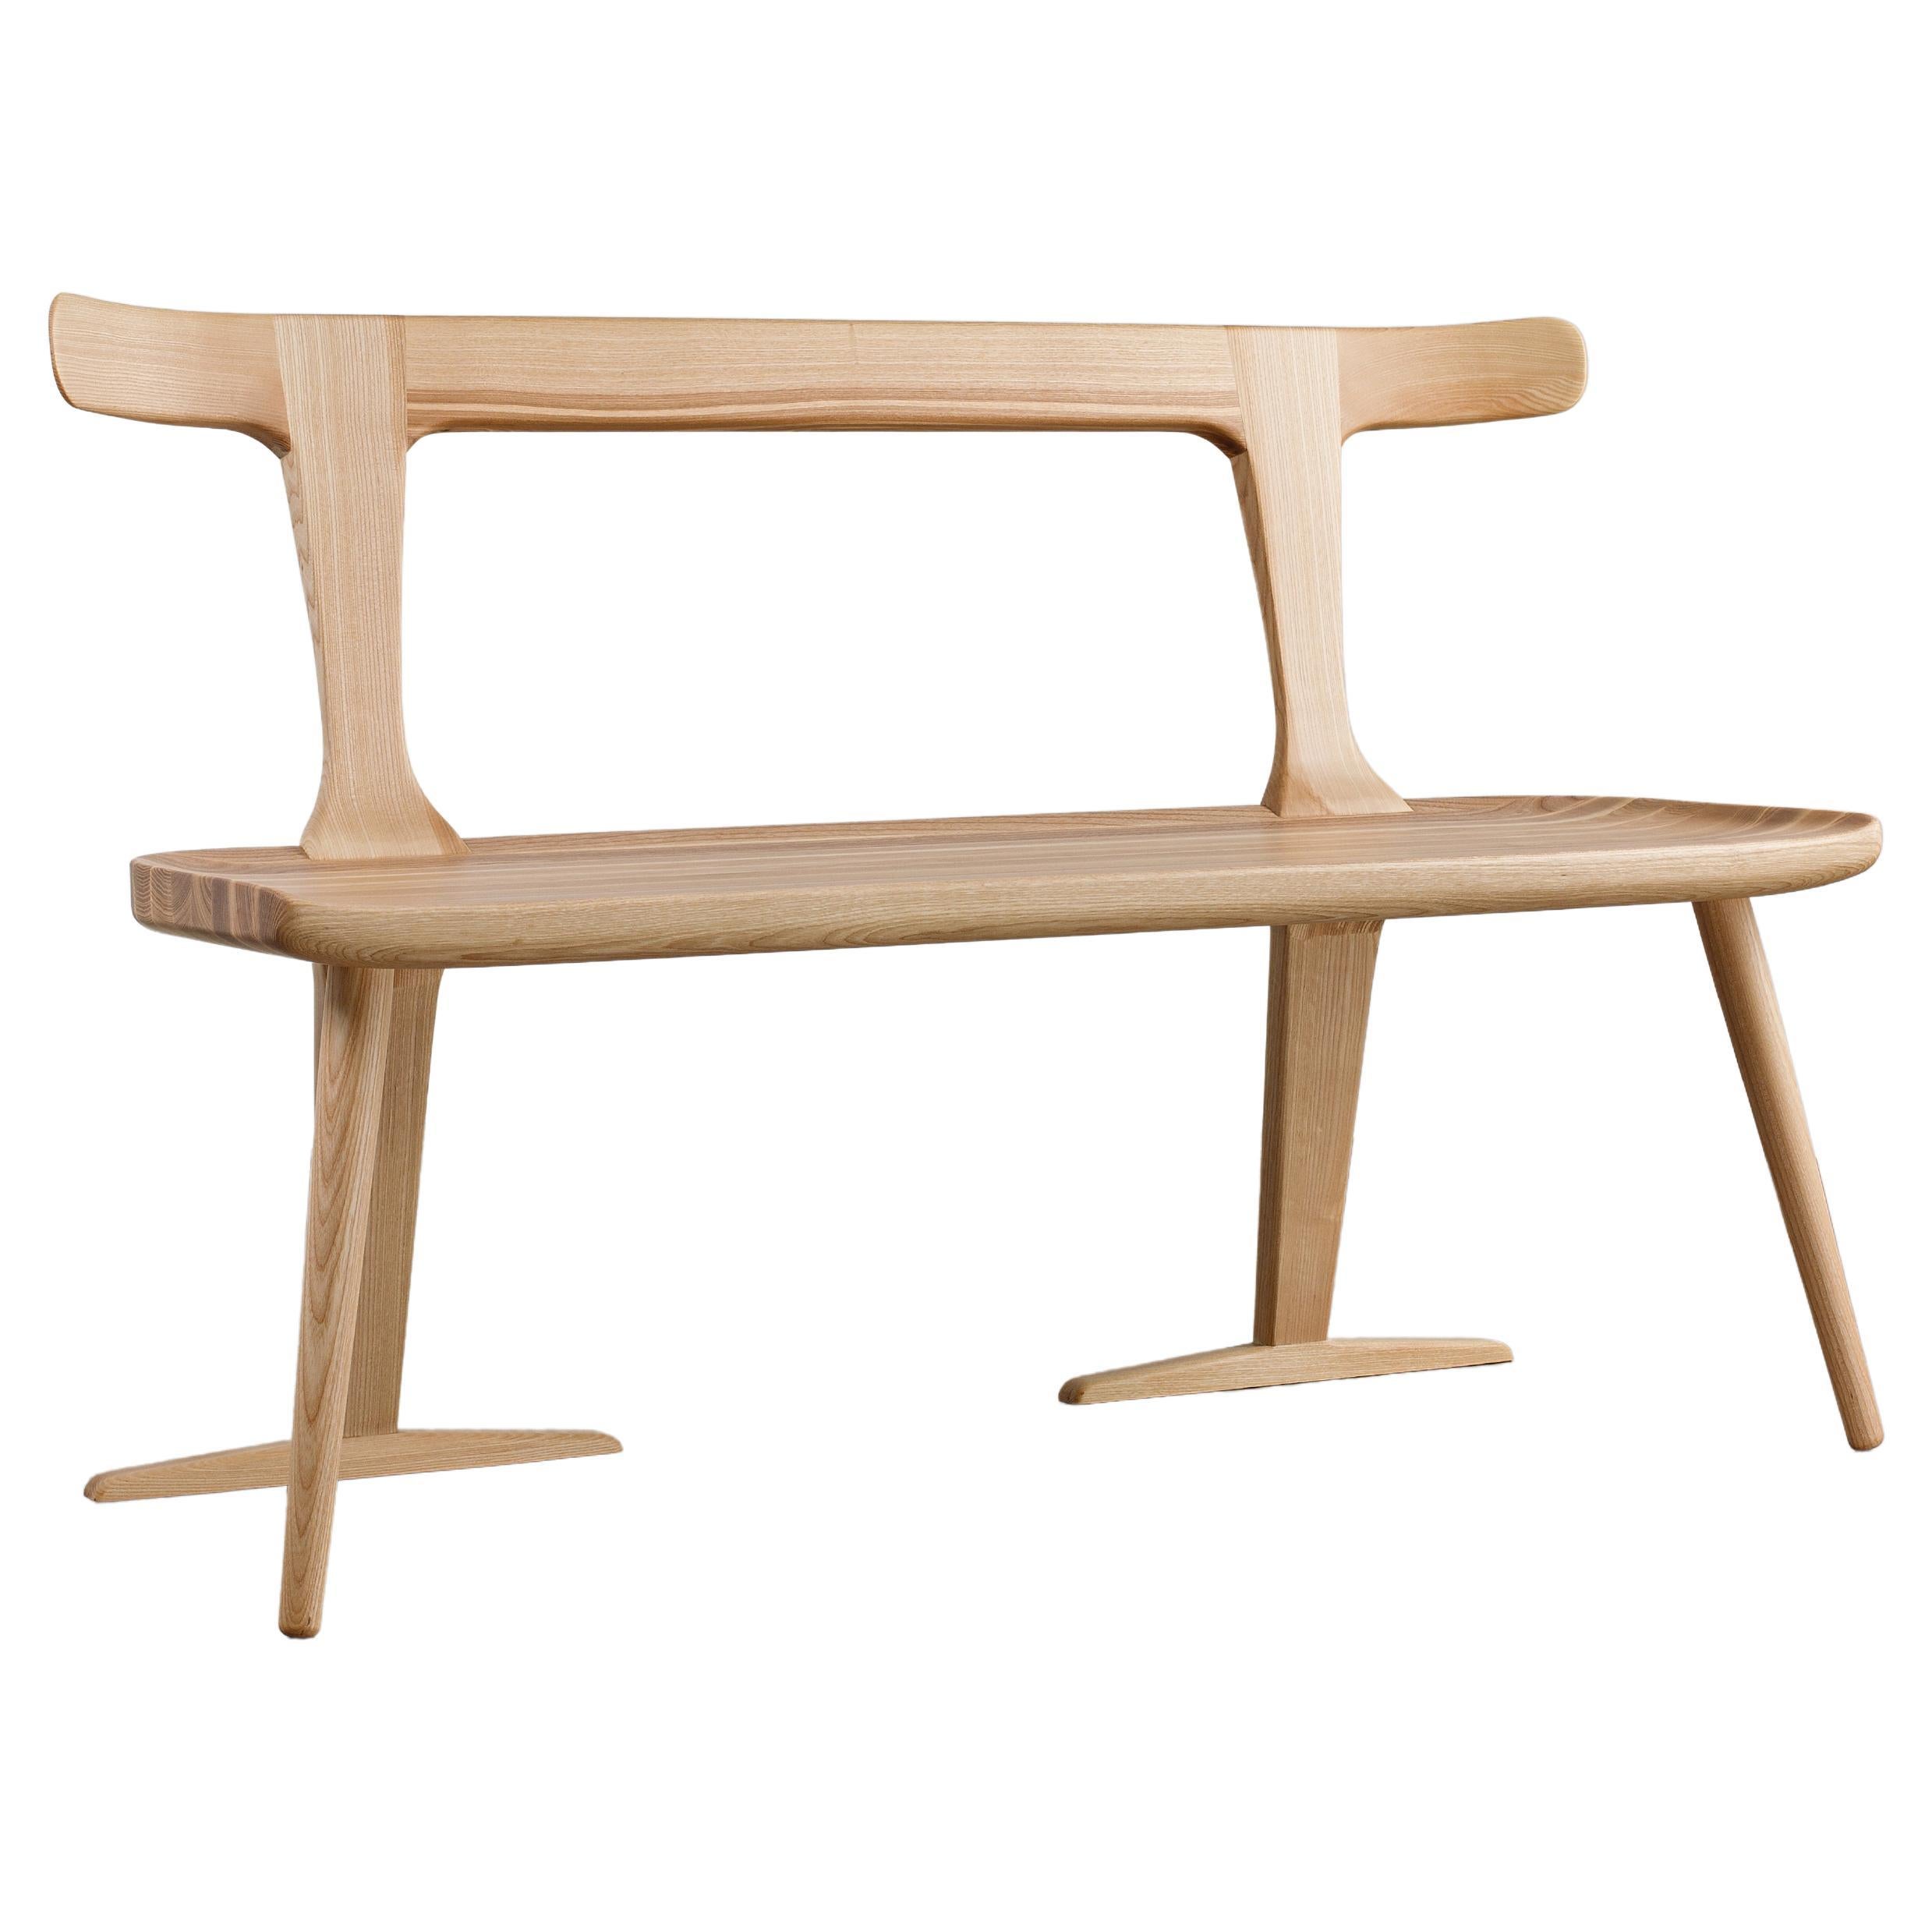 Natural Ash Solid Wood Bench, Entryway Wood Bench